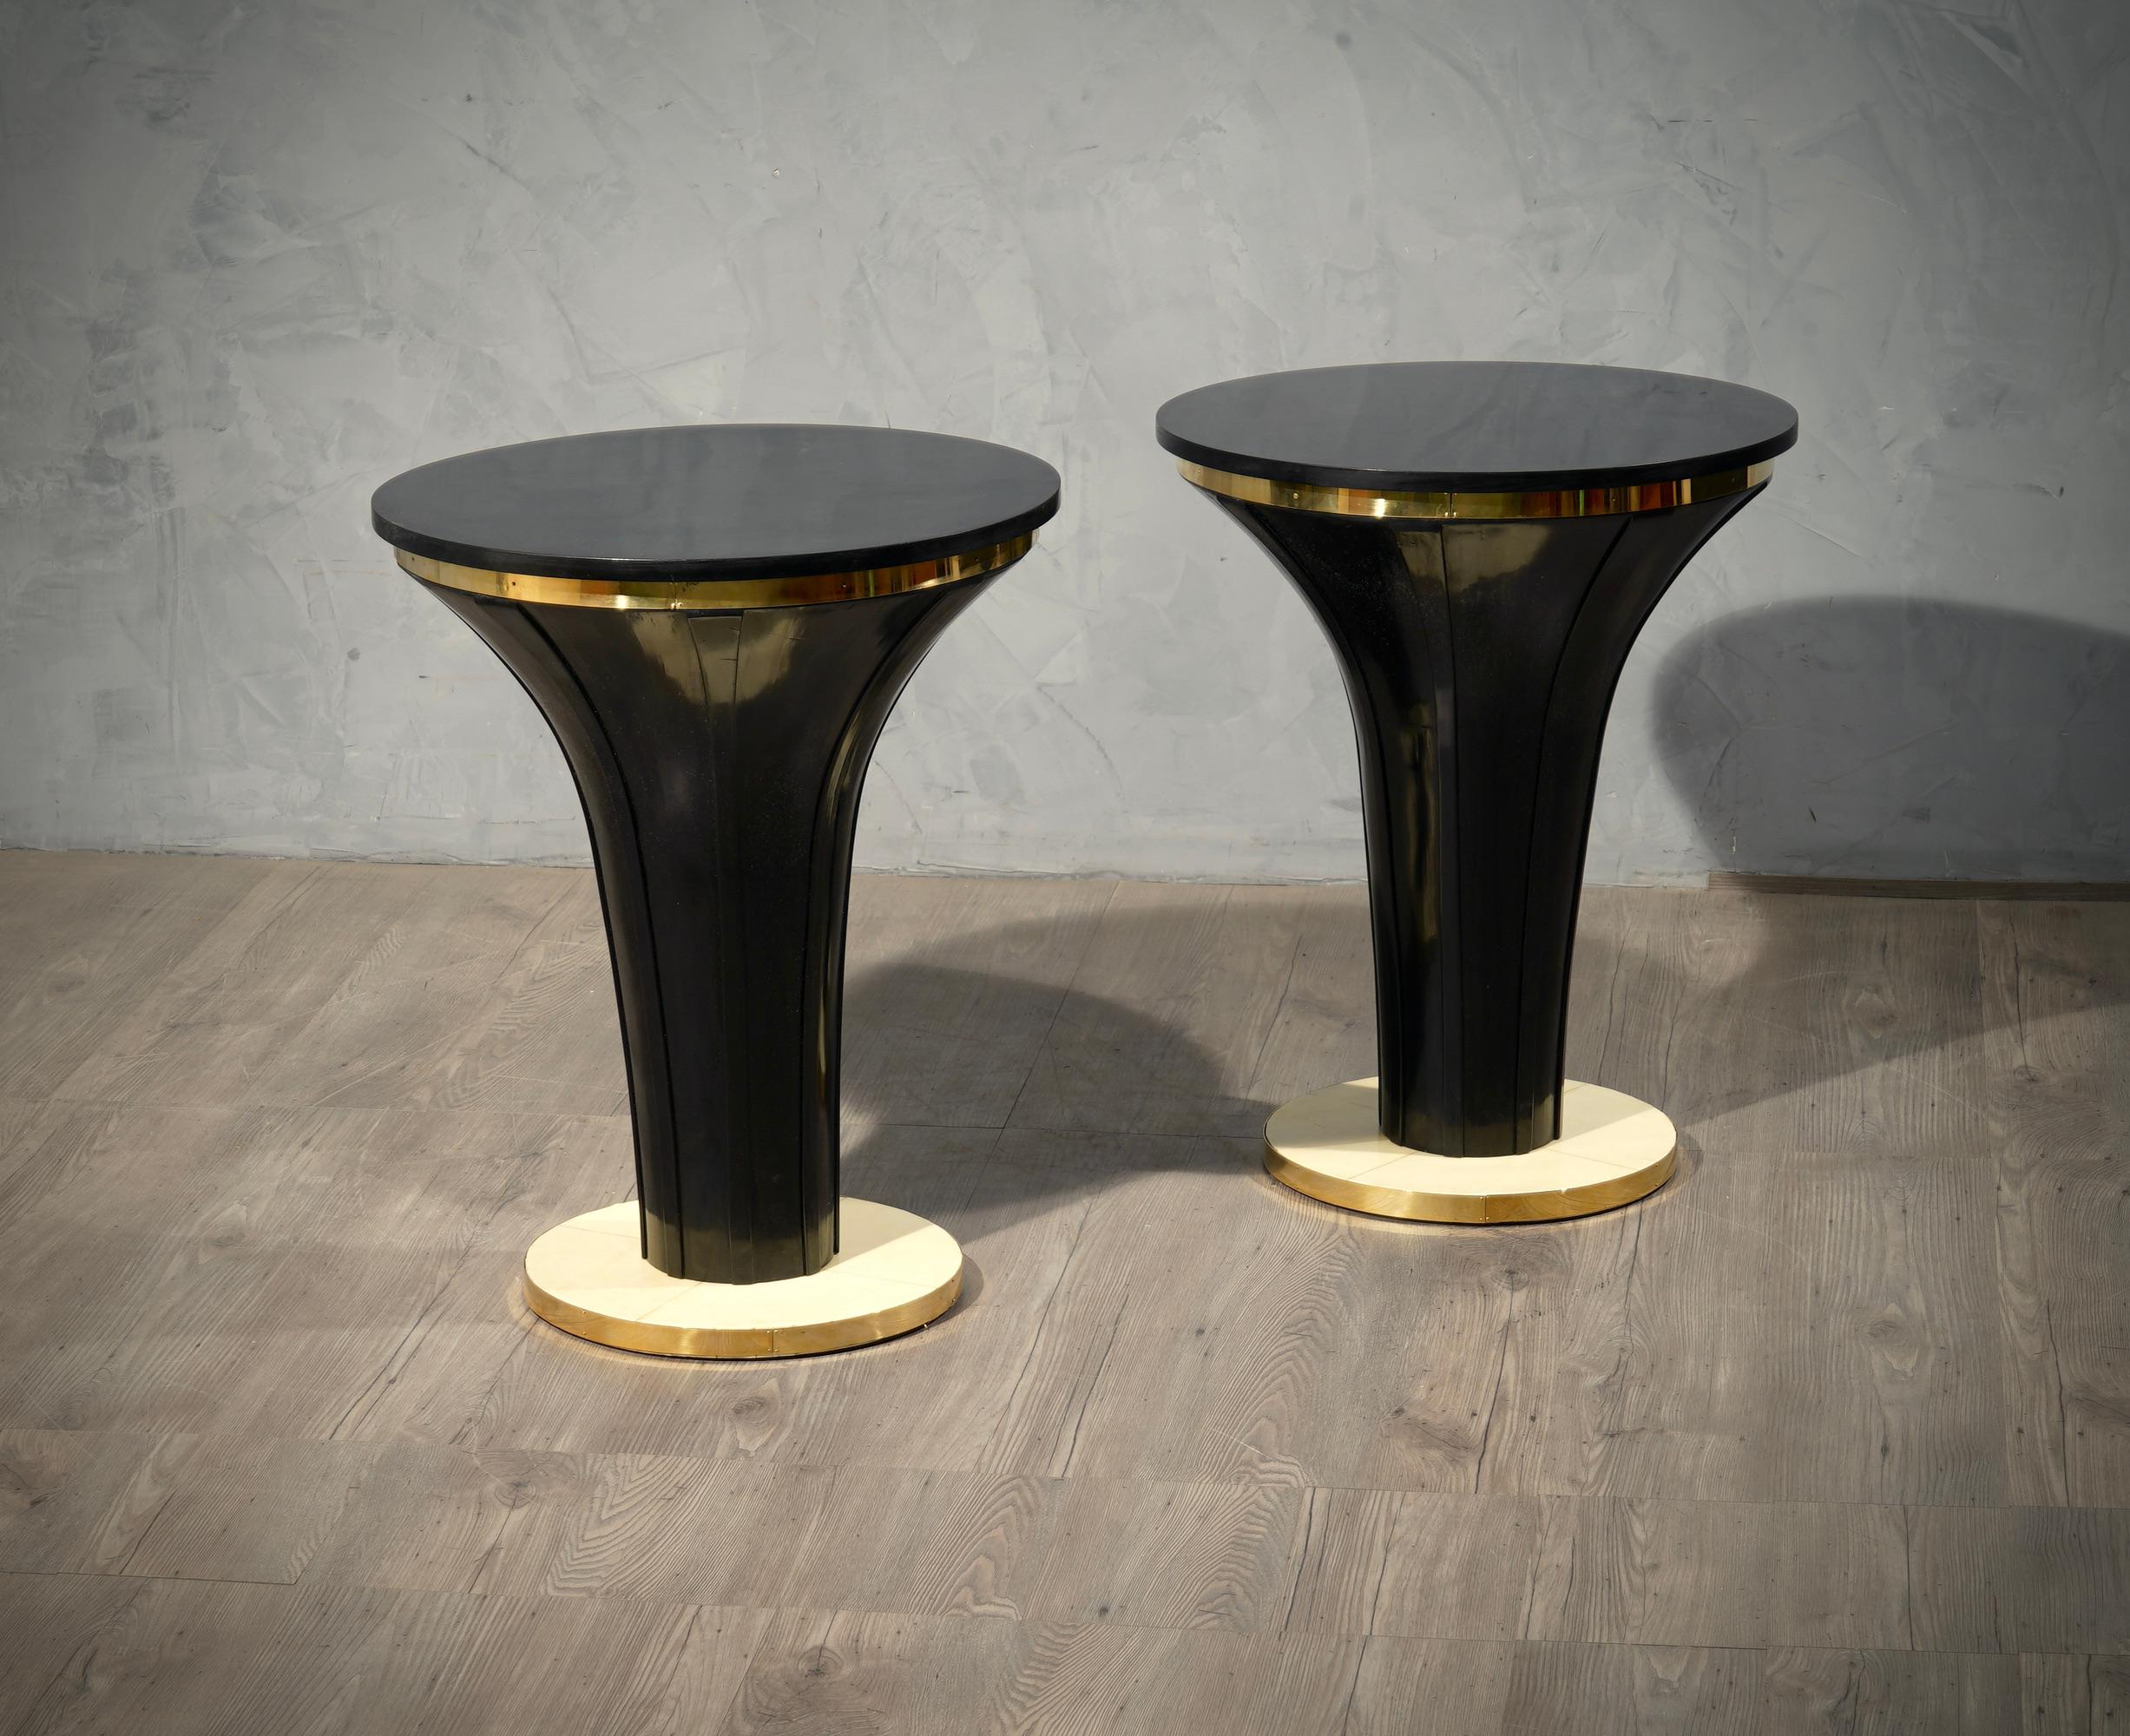 A splendid pair of side tables with a very special tulip design and a splendid goatskin patina that enhances their shape even more.

The side tables are formed by a wooden structure in the shape of a bouquet of flowers, they are all polished in